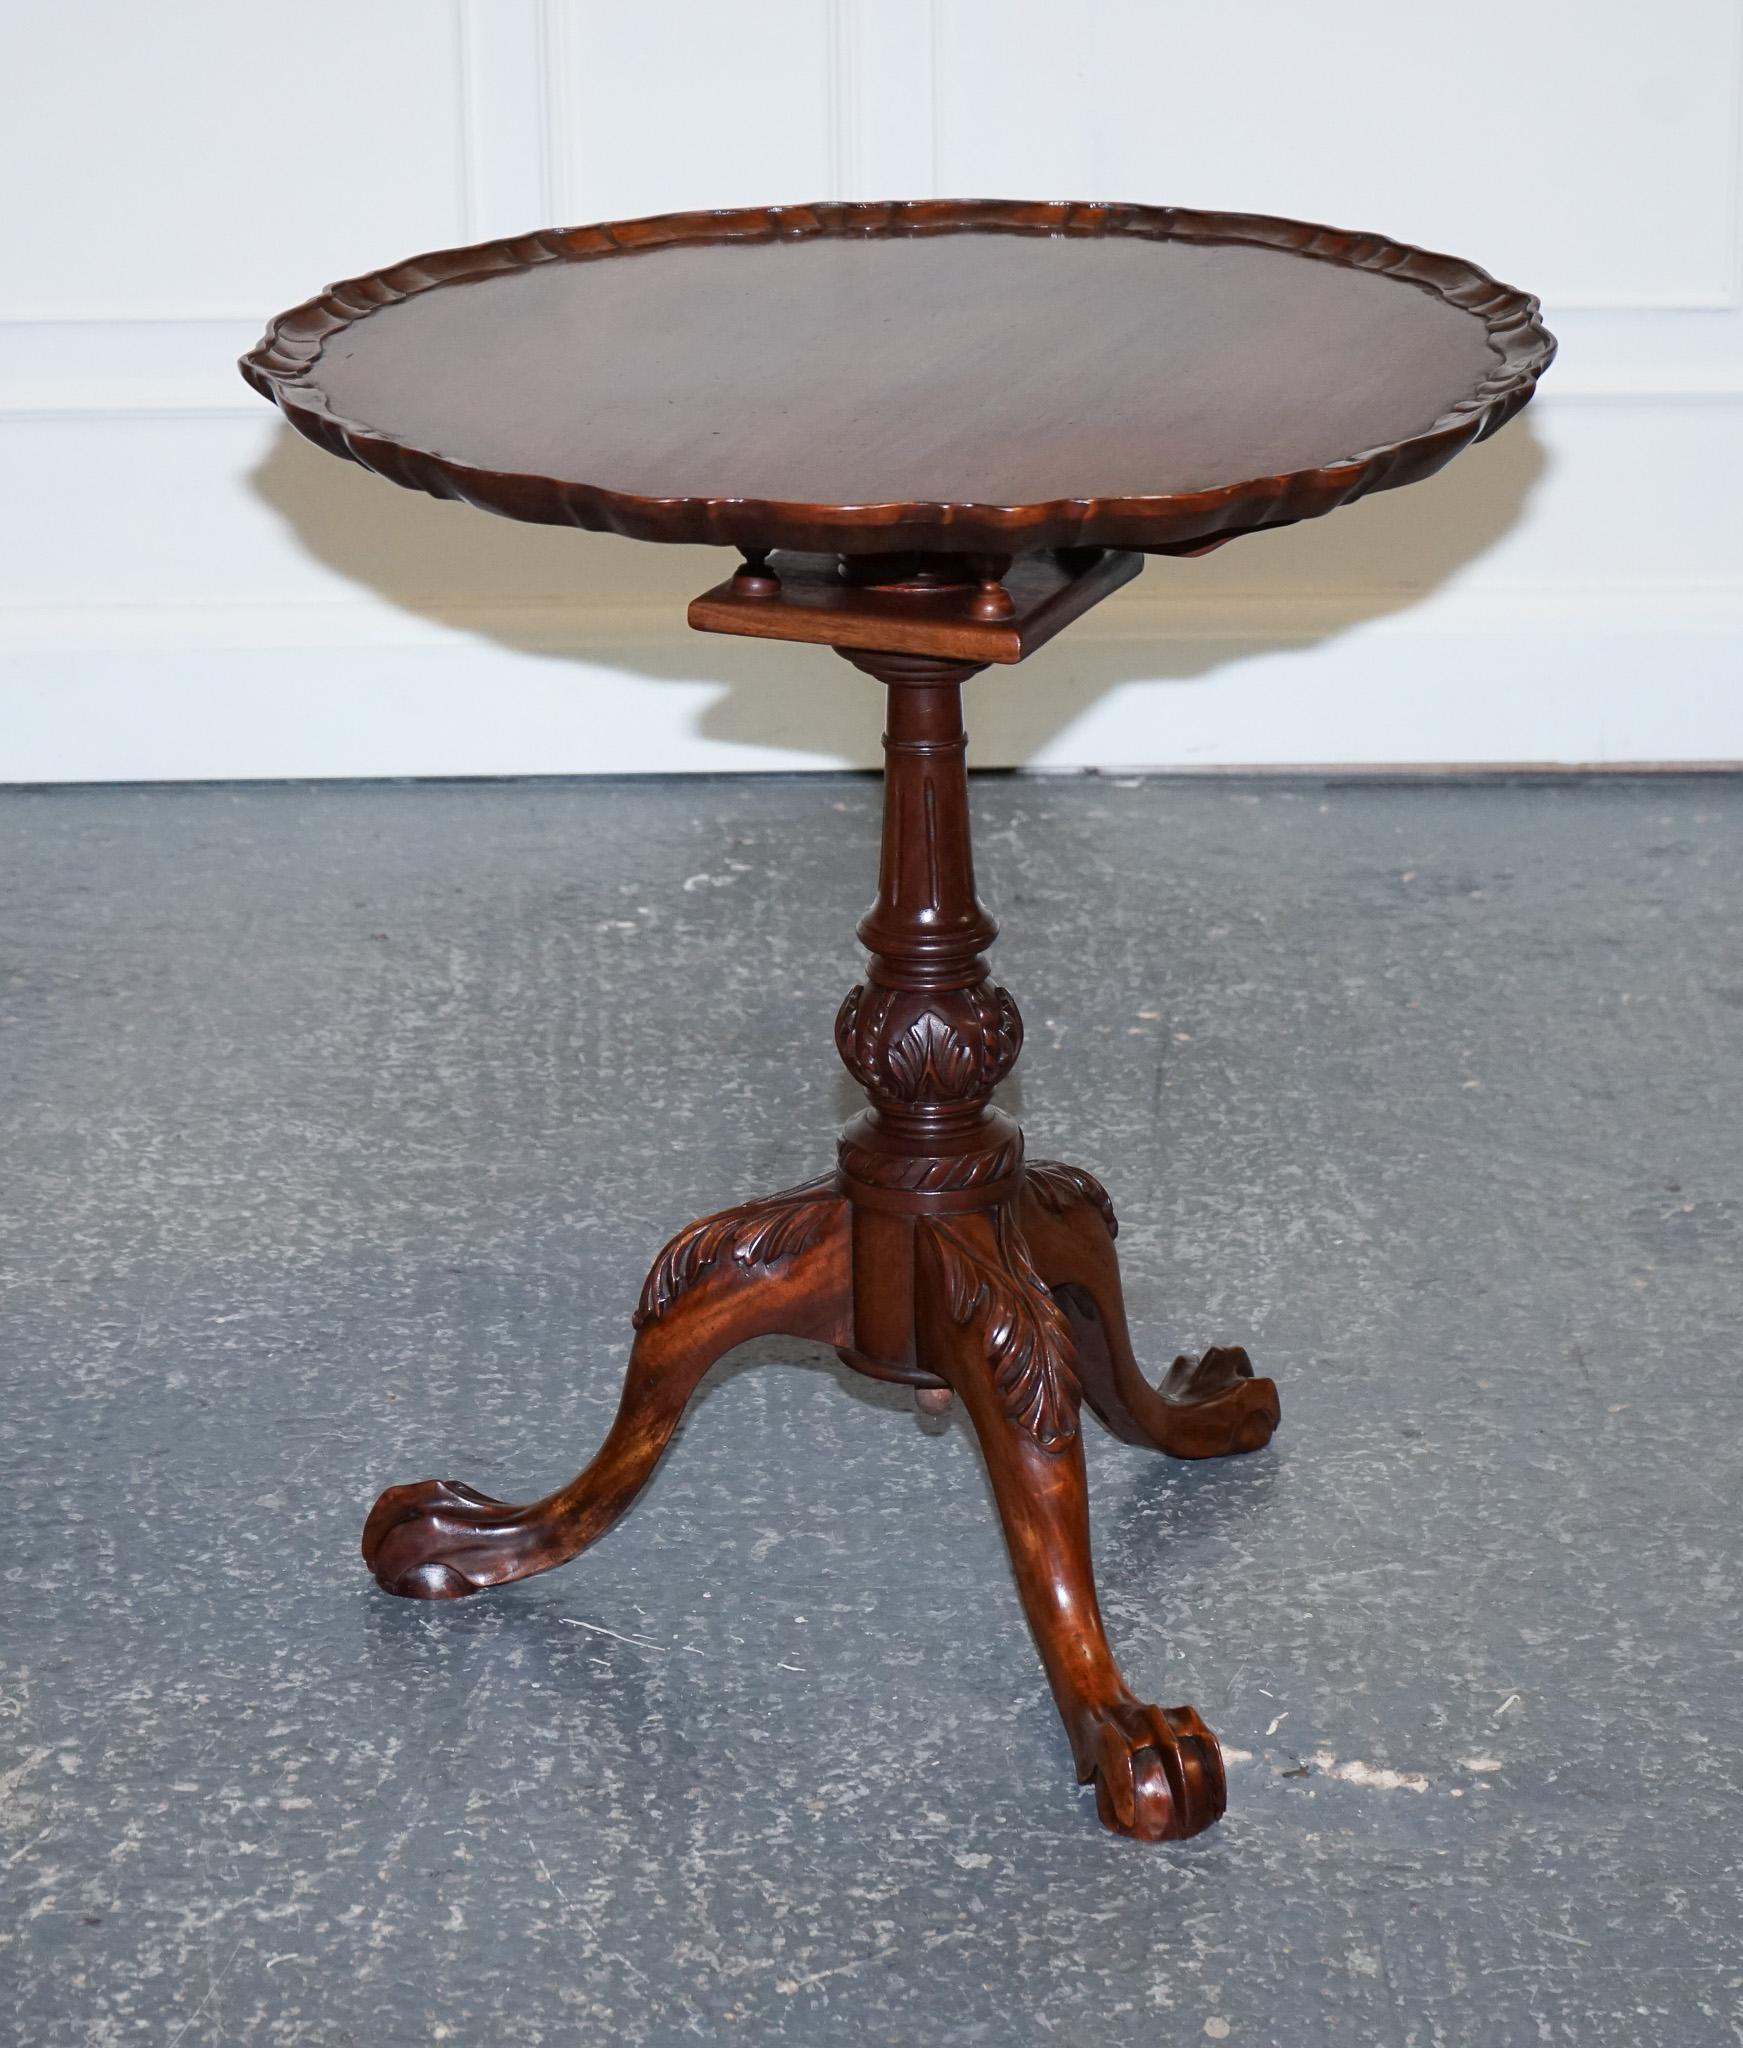 Antiques of London

We are delighted to offer for sale this Gorgeous Pie Crust Tilt Top Side Table.

The Large Pie Crust Tilt Top Side Table is a beautiful and elegant piece of furniture that can be used for various purposes such as displaying